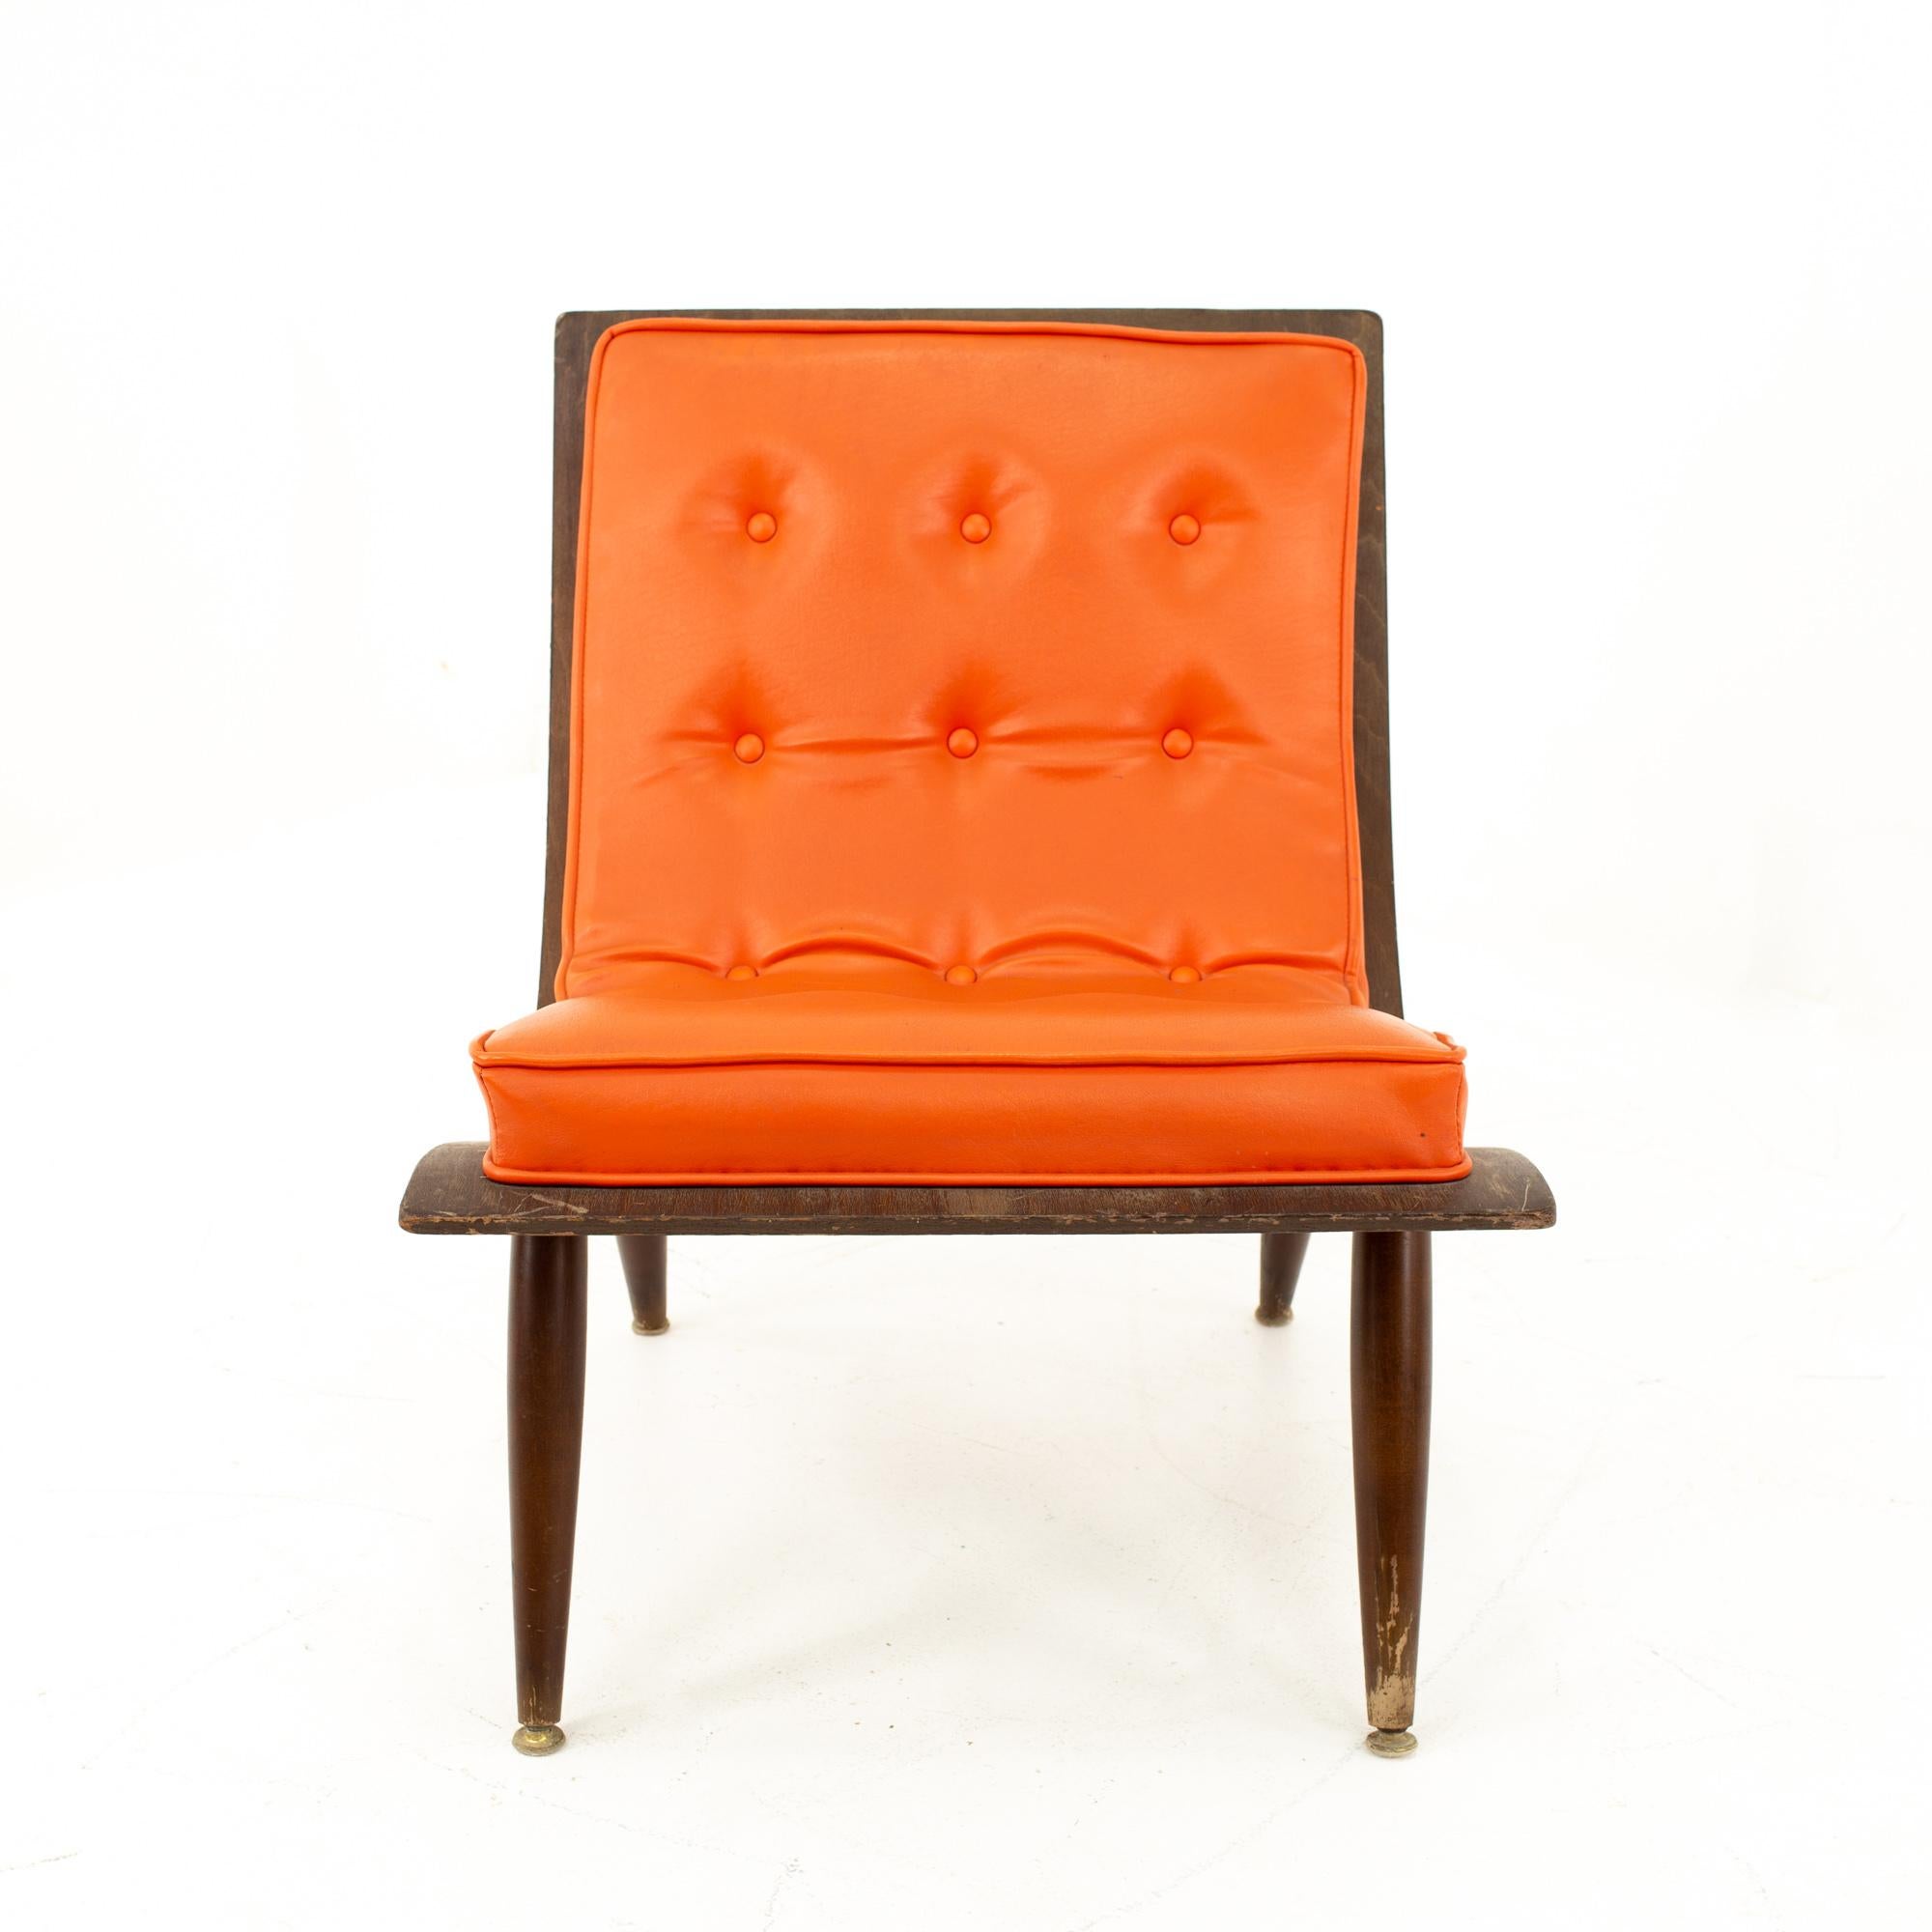 Paul and John Carter for Carter Brothers Mid Century orange and walnut bent plywood scoop chair
Chair measures: 23 wide x 28 deep x 29 high

This piece is available in what we call restored vintage condition. Upon purchase it is thoroughly cleaned